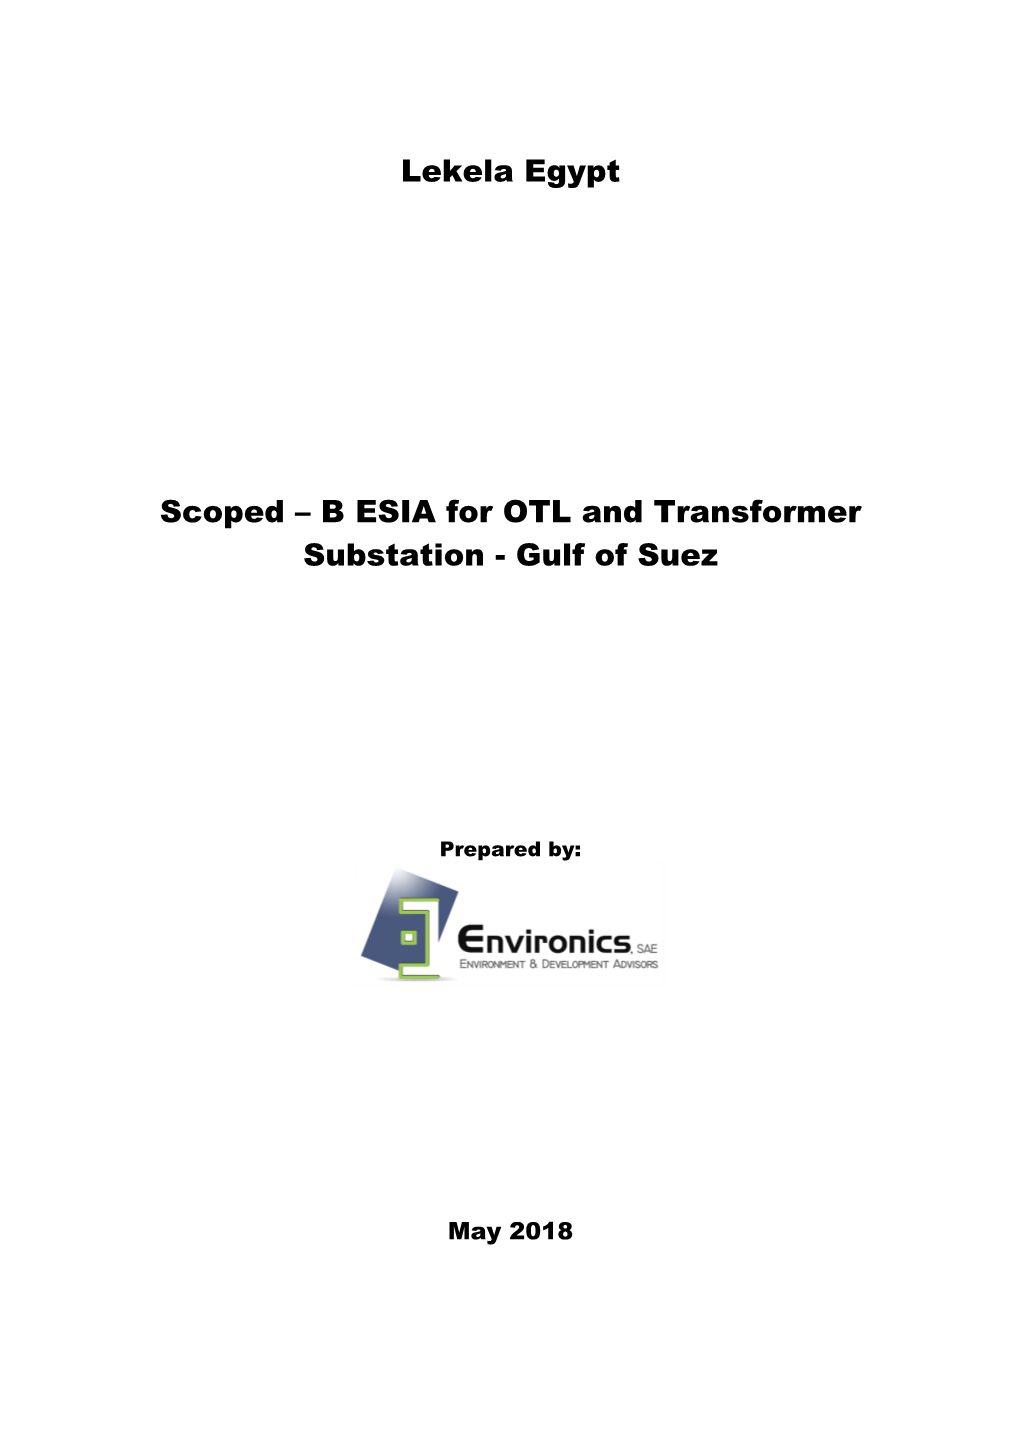 Environmental and Social Impact Assessment for Transmission Line